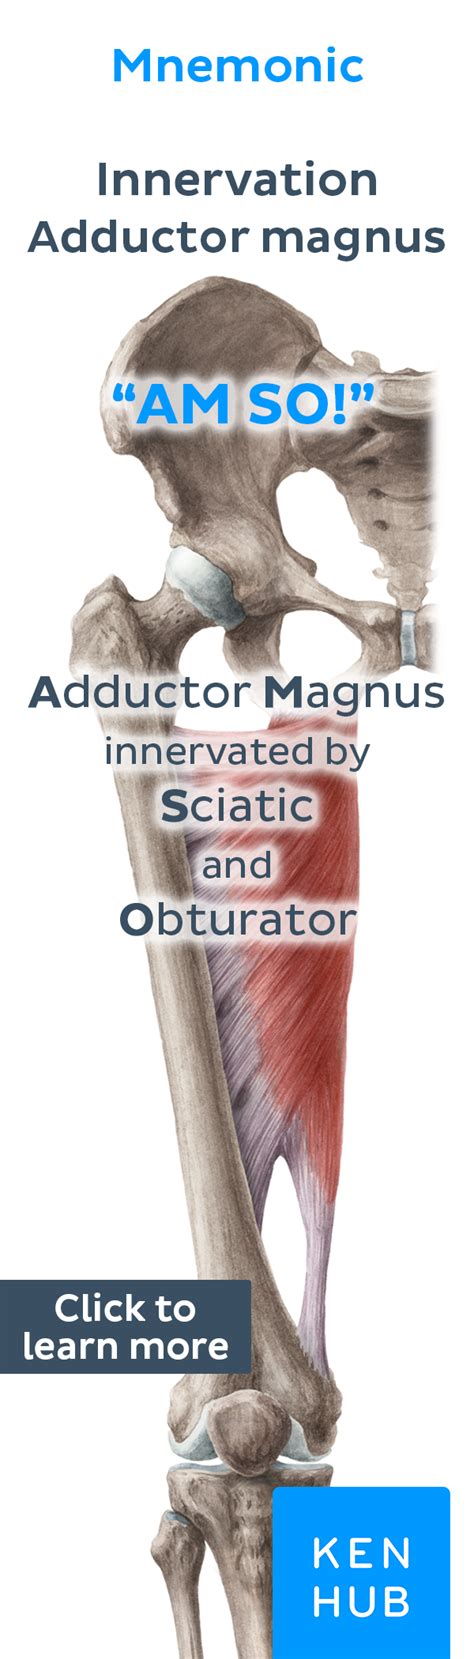 The Adductor Magnus Muscle Has A Double Innervation Pin It And You